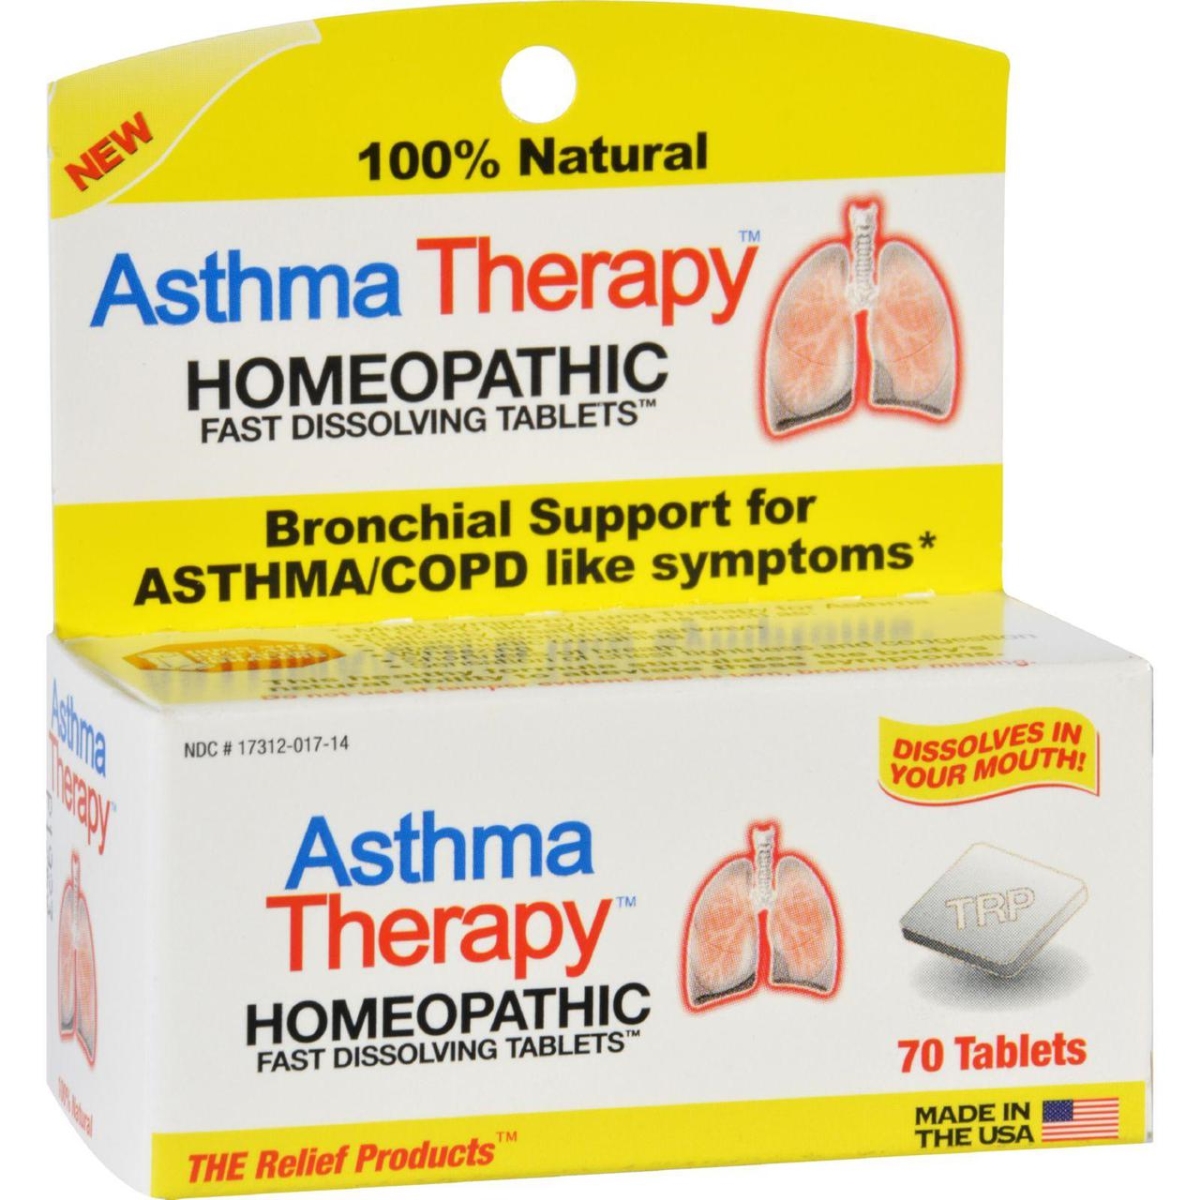 Hg1181270 Asthma Therapy - 70 Tablets